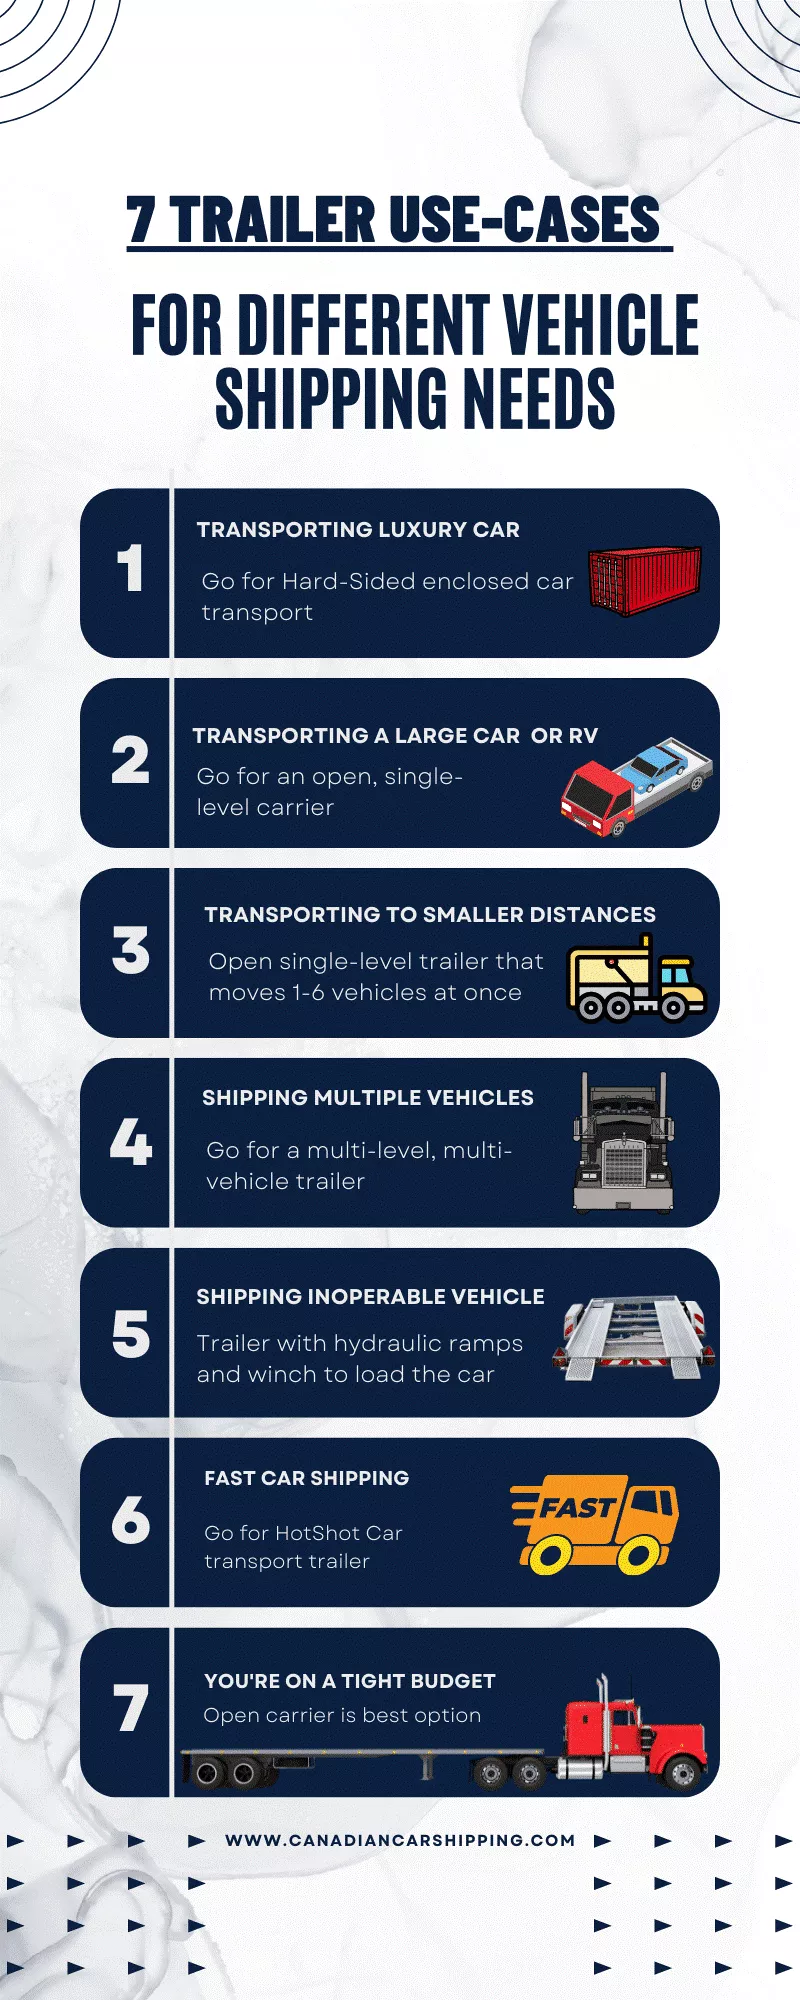 Auto Transport Trailer, Which Auto Transport Trailer is Right? 7 Use-Cases For Your Vehicle Shipping Needs